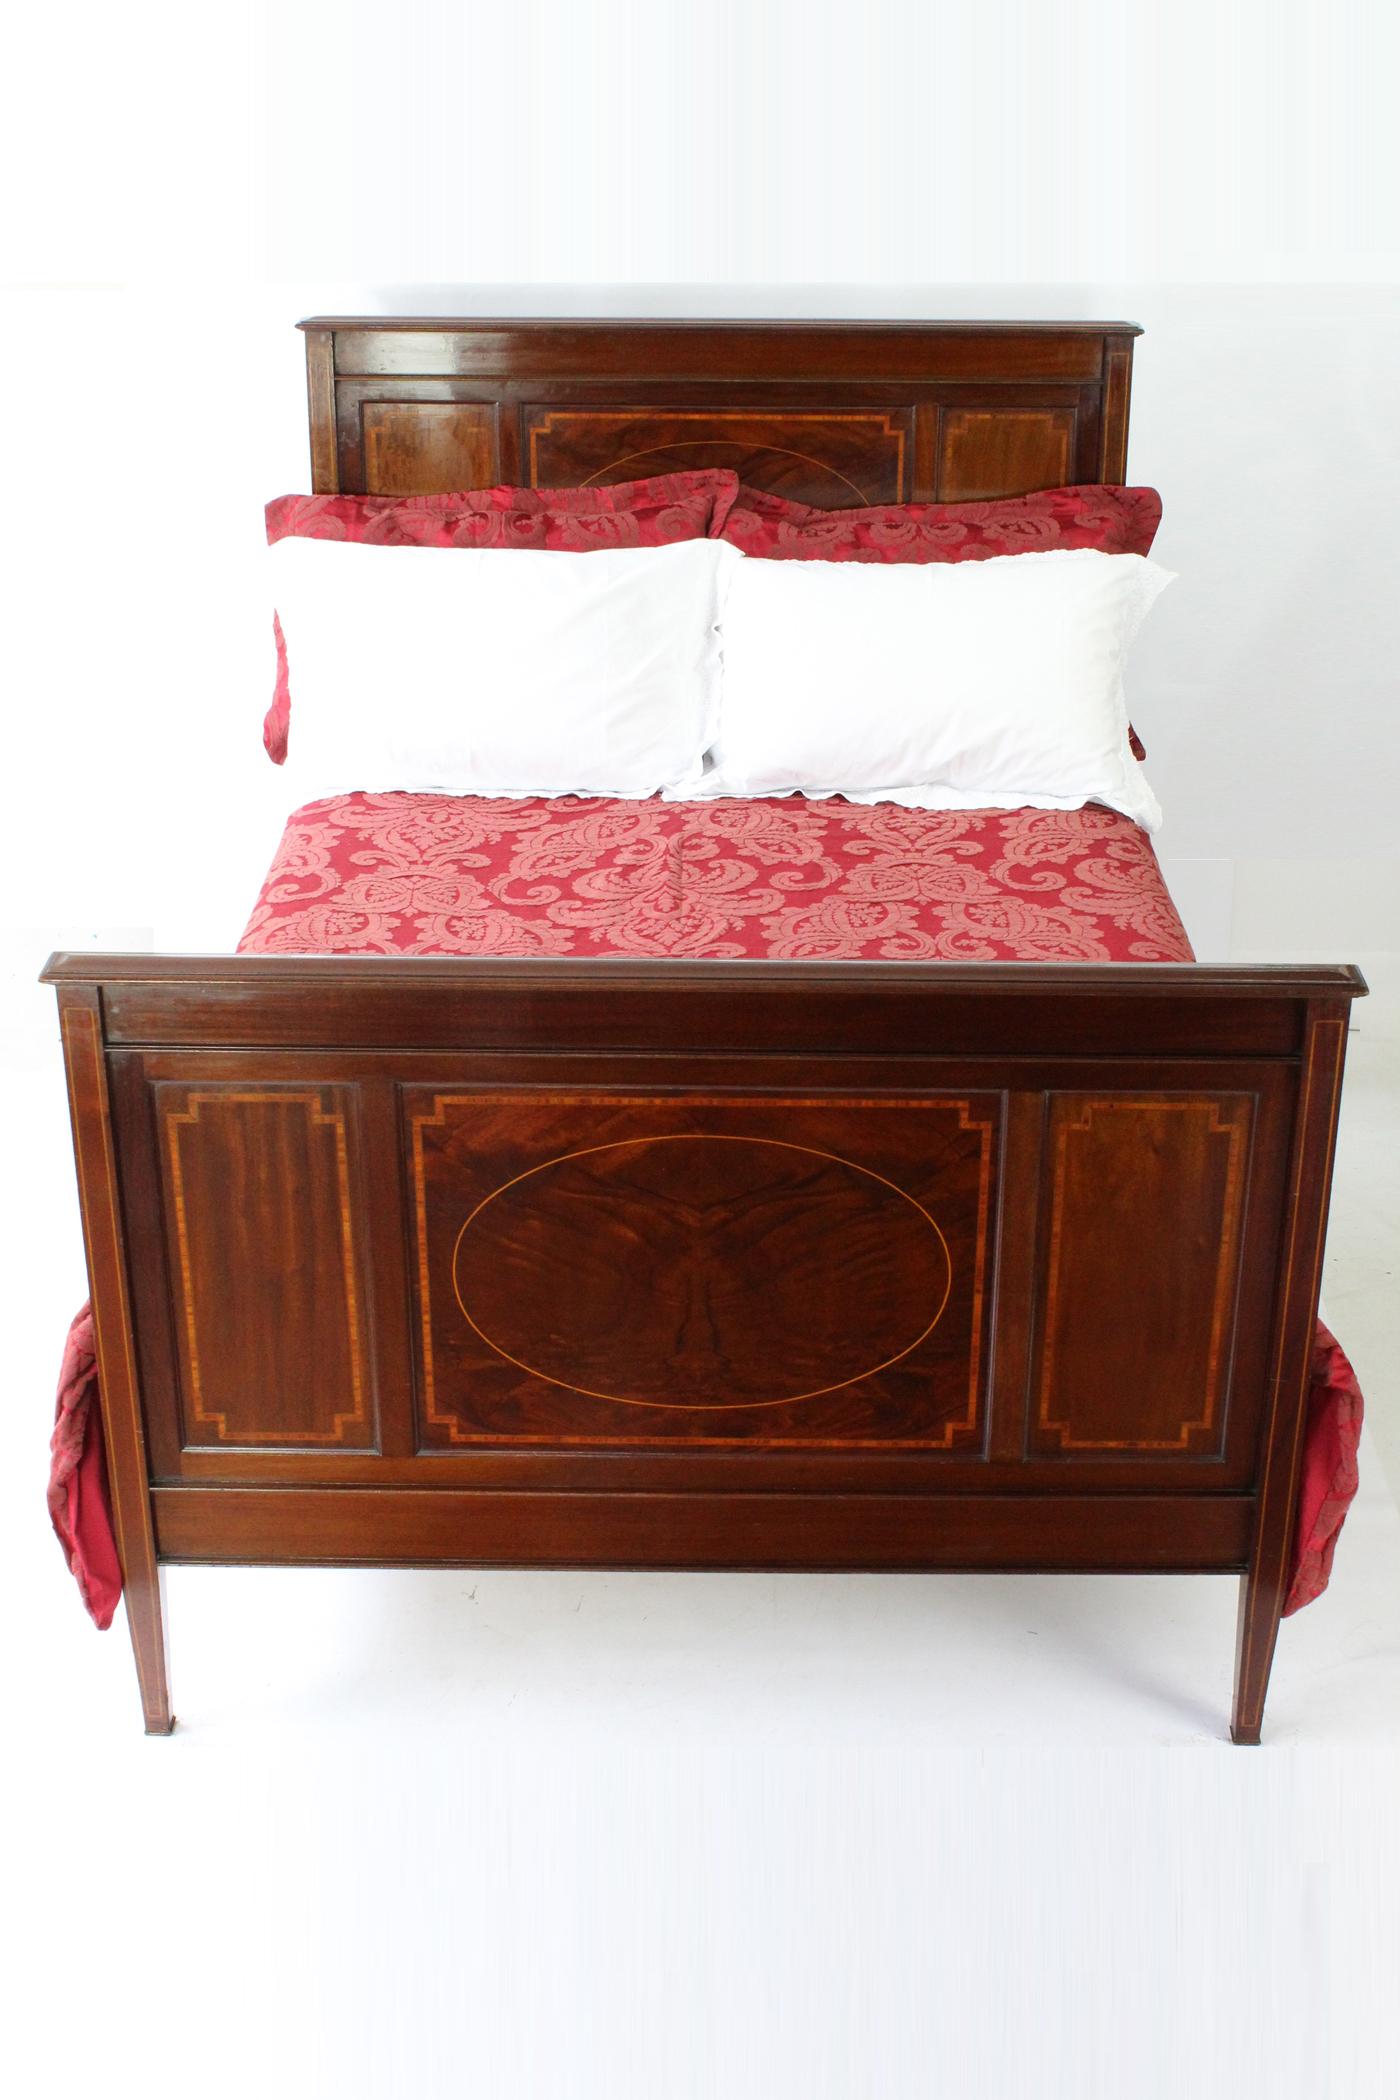 Inlay Antique Victorian Inlaid Mahogany Bedstead UK Double Bed / US Full Frame